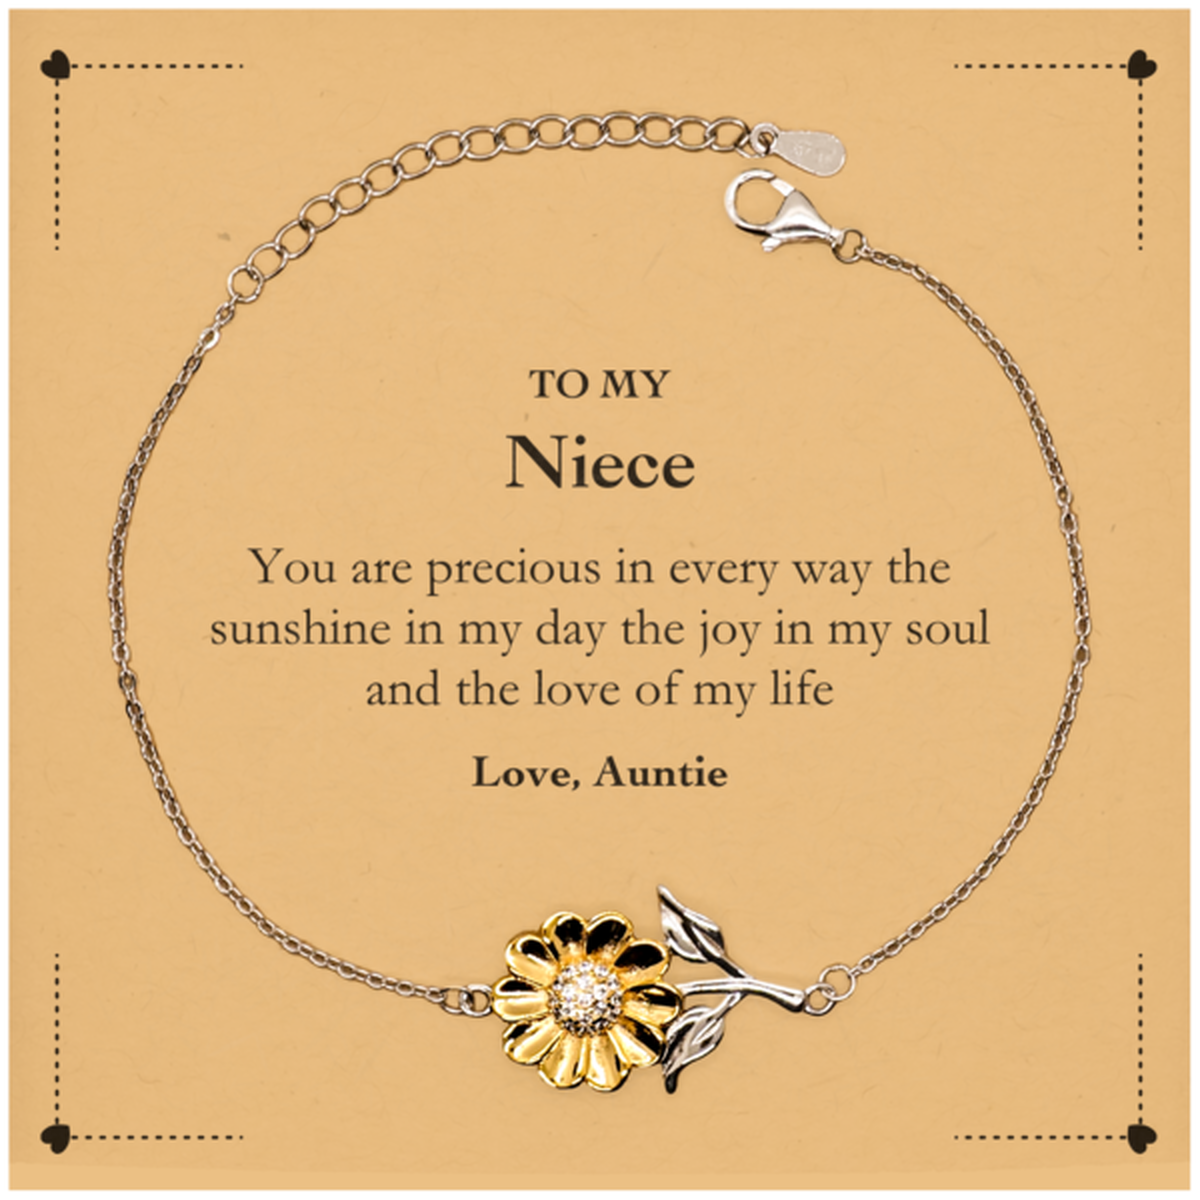 Graduation Gifts for Niece Sunflower Bracelet Present from Auntie, Christmas Niece Birthday Gifts Niece You are precious in every way the sunshine in my day. Love, Auntie